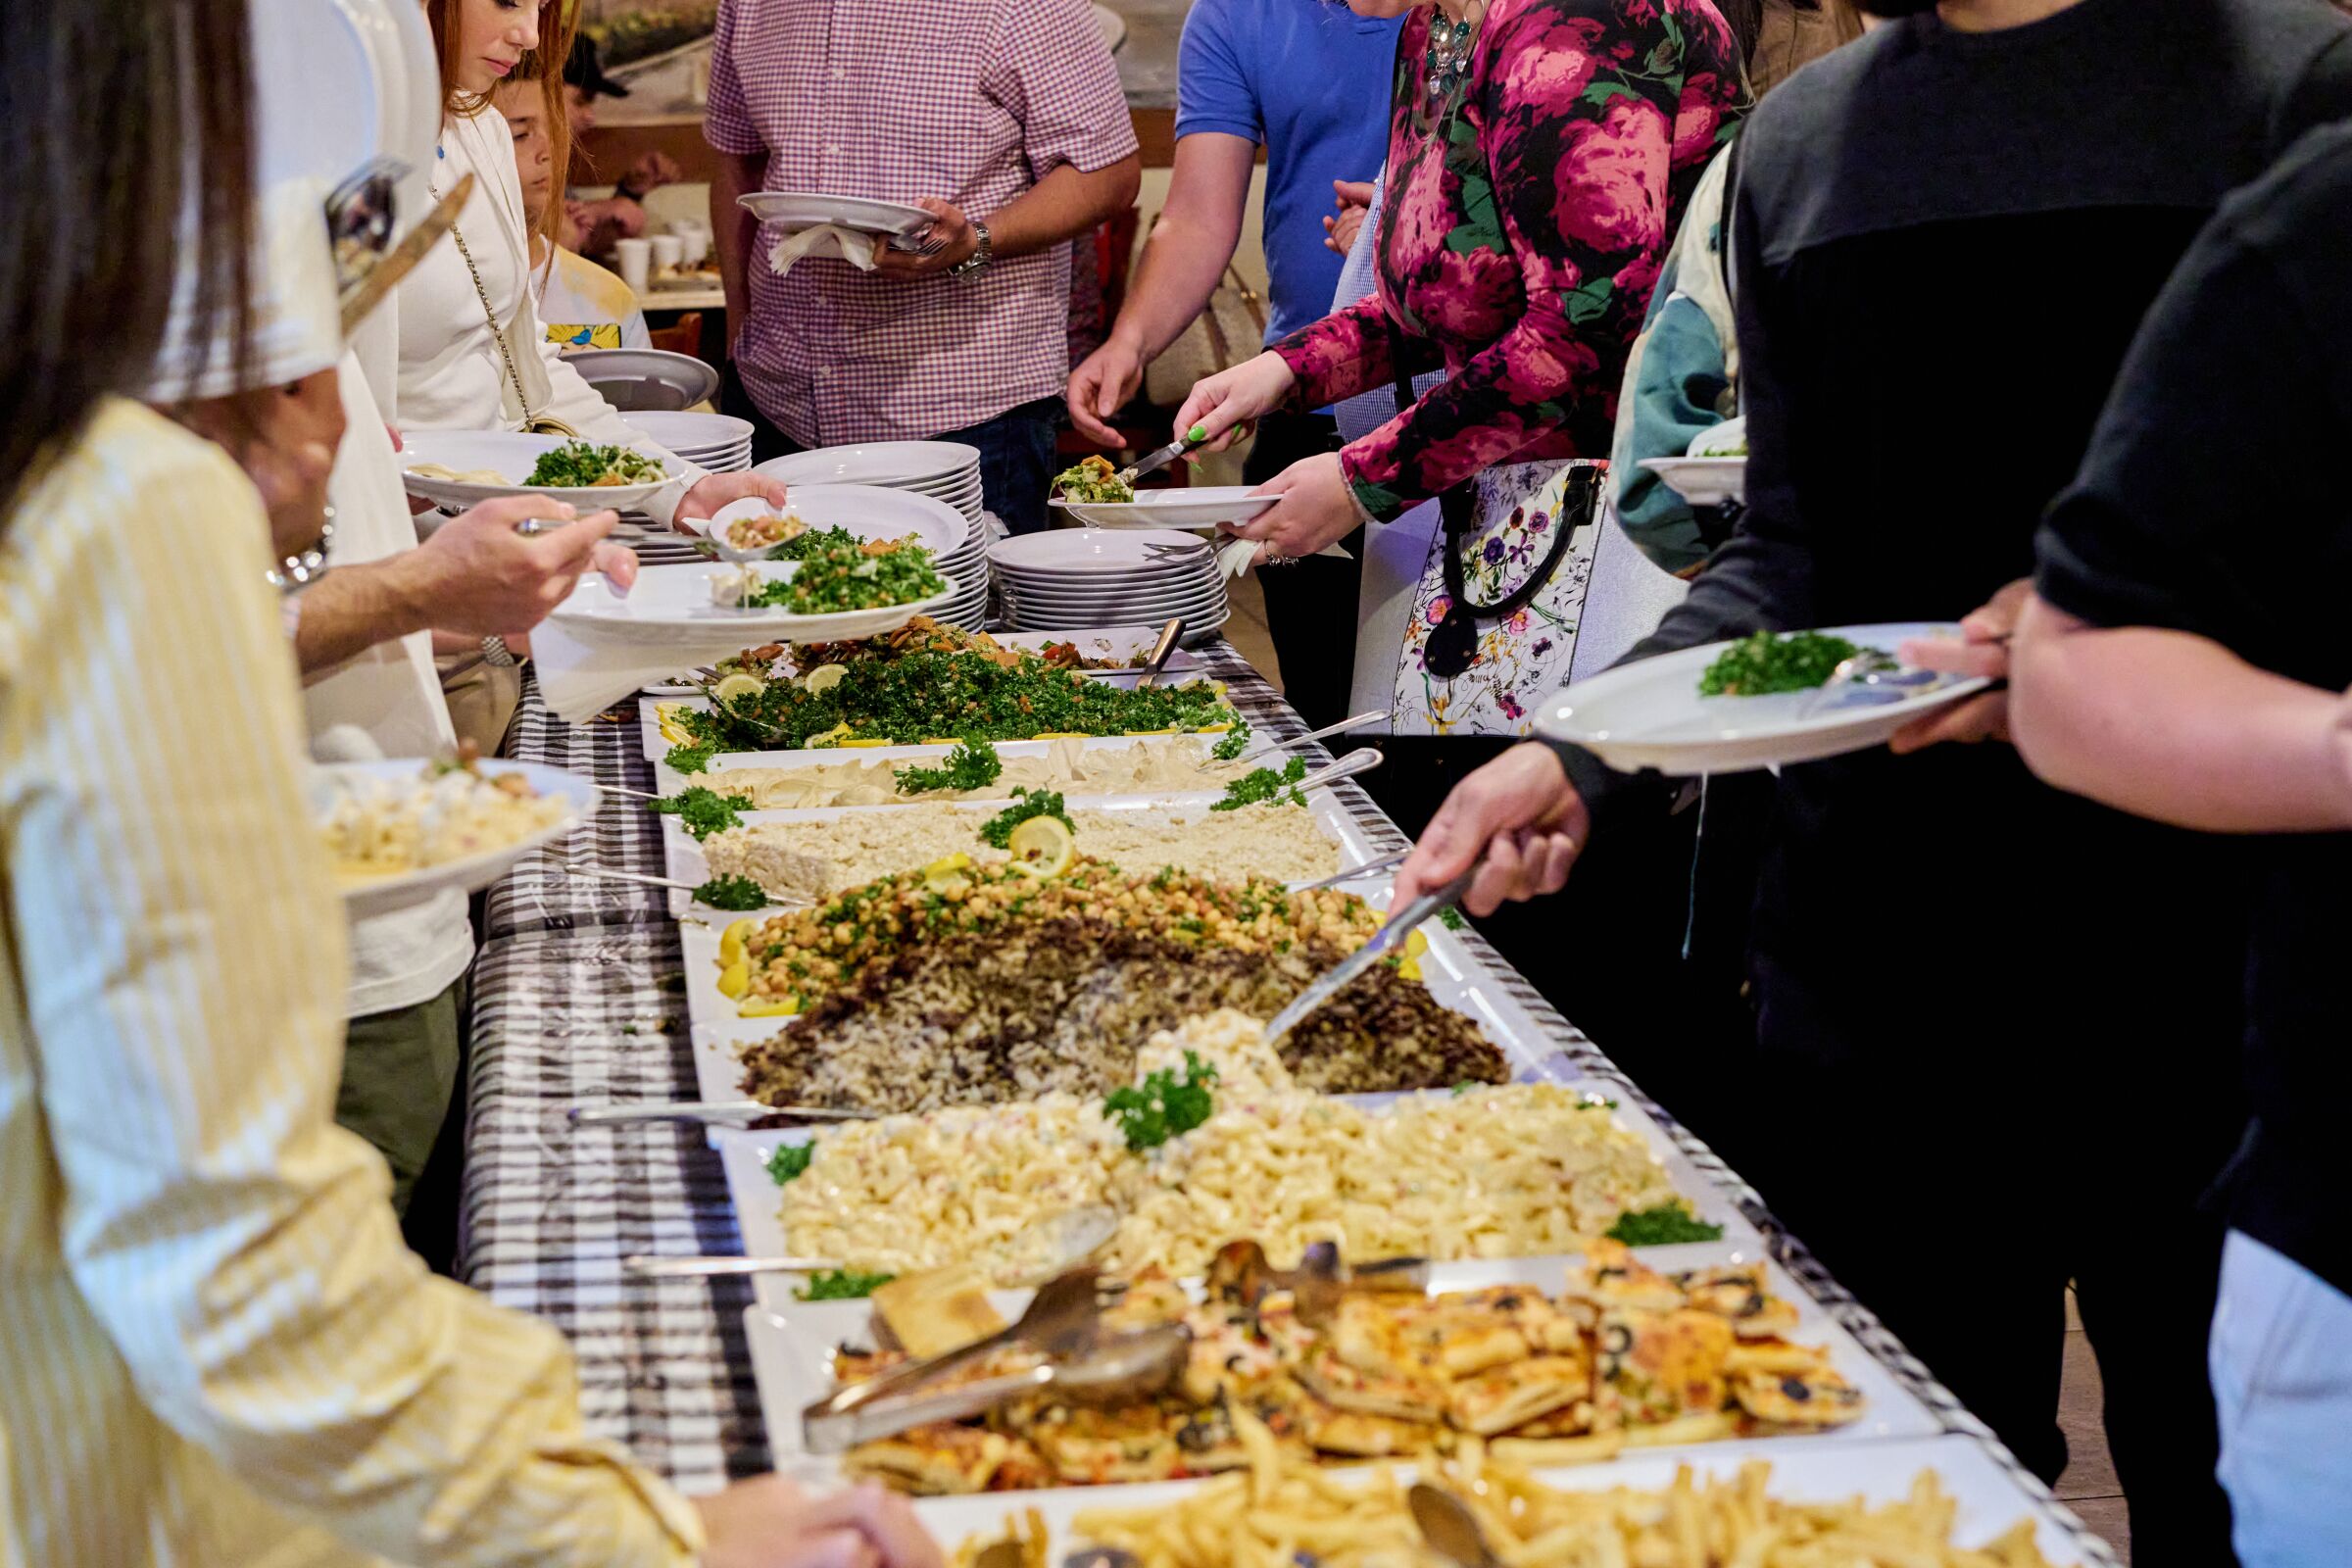 Diners line up to break their fast with an iftar buffet during Ramadan at Aleppo's Kitchen in Anaheim.